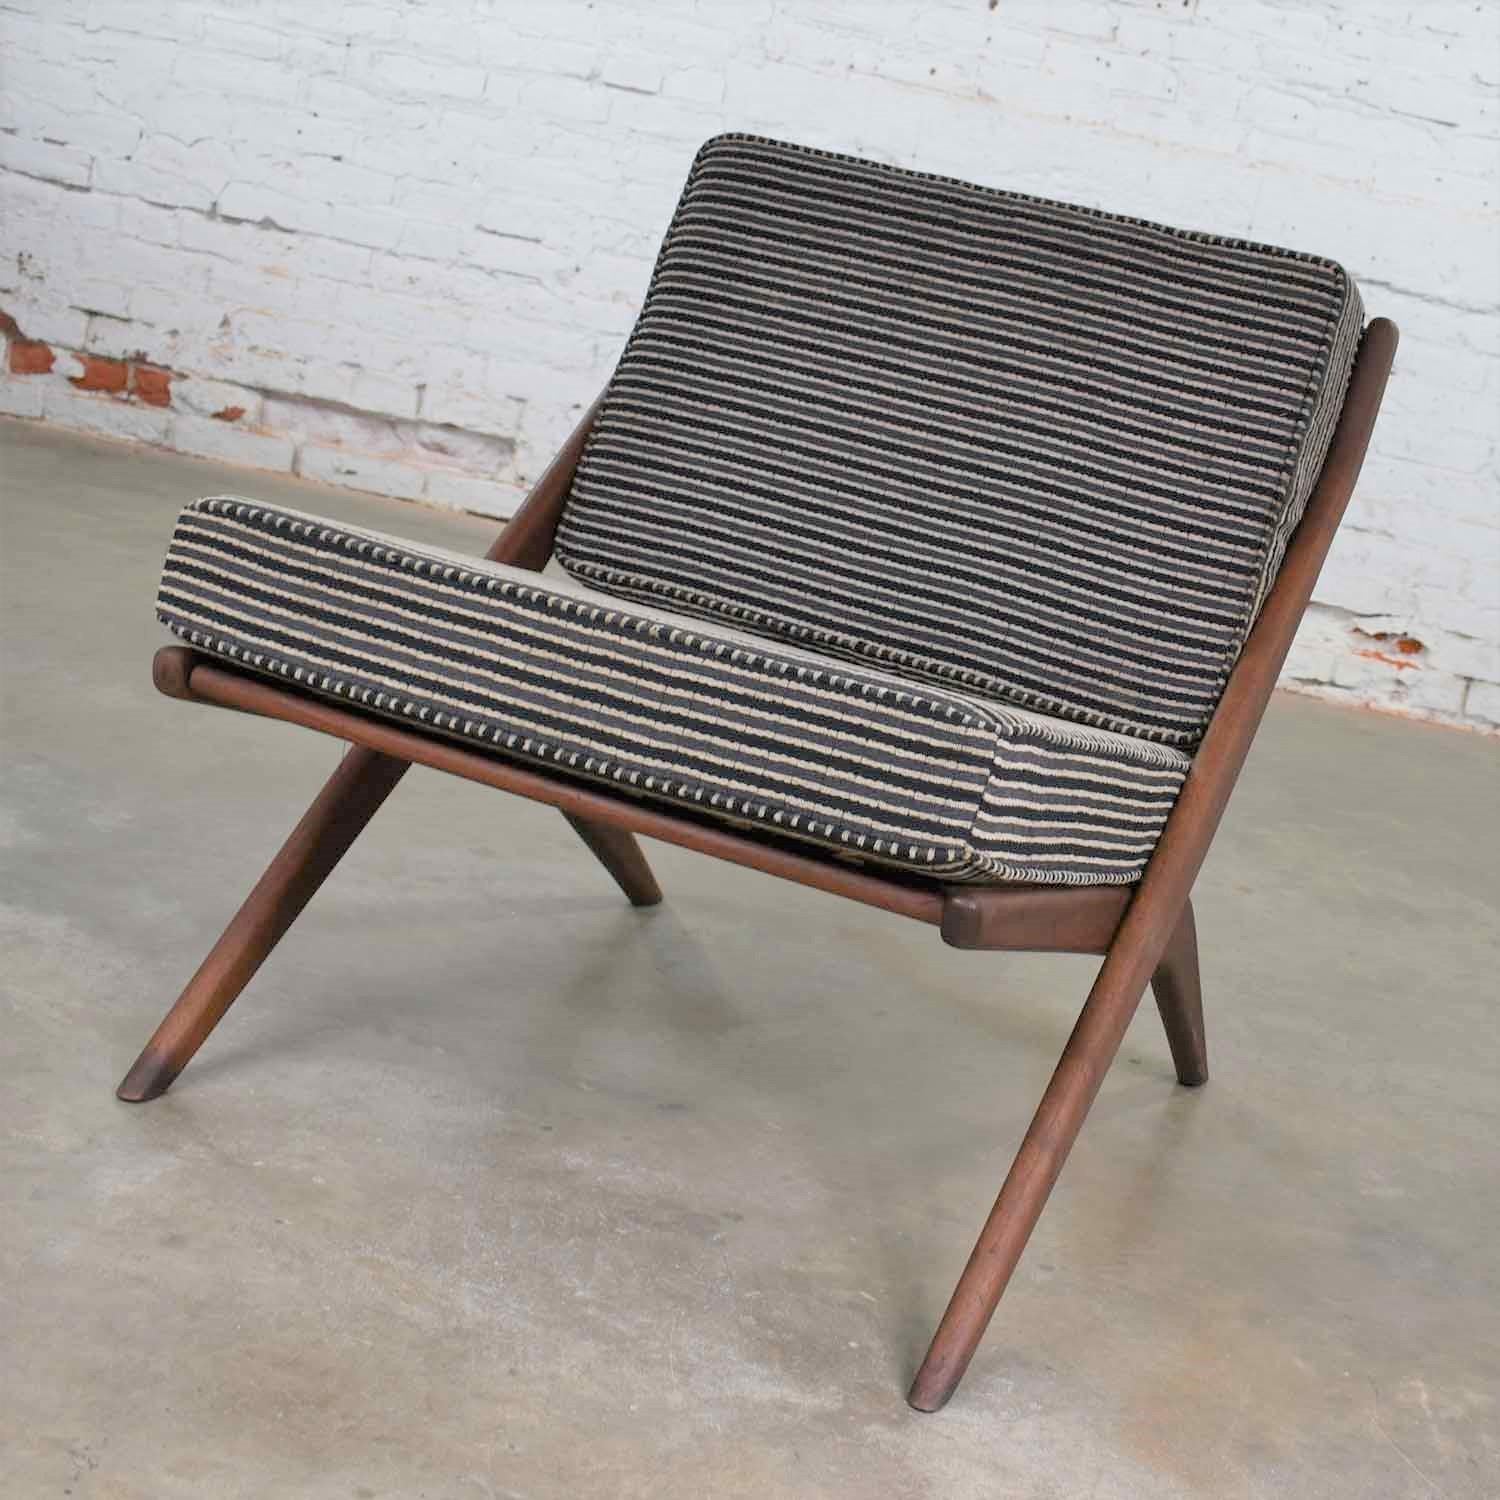 Handsome and iconic Scandinavian Modern Scissor lounge chair designed by Folke Ohlsson for DUX. It is in wonderful vintage condition. The wood frame has been restored; however, there may still be small signs of age. We did have to fill some rather